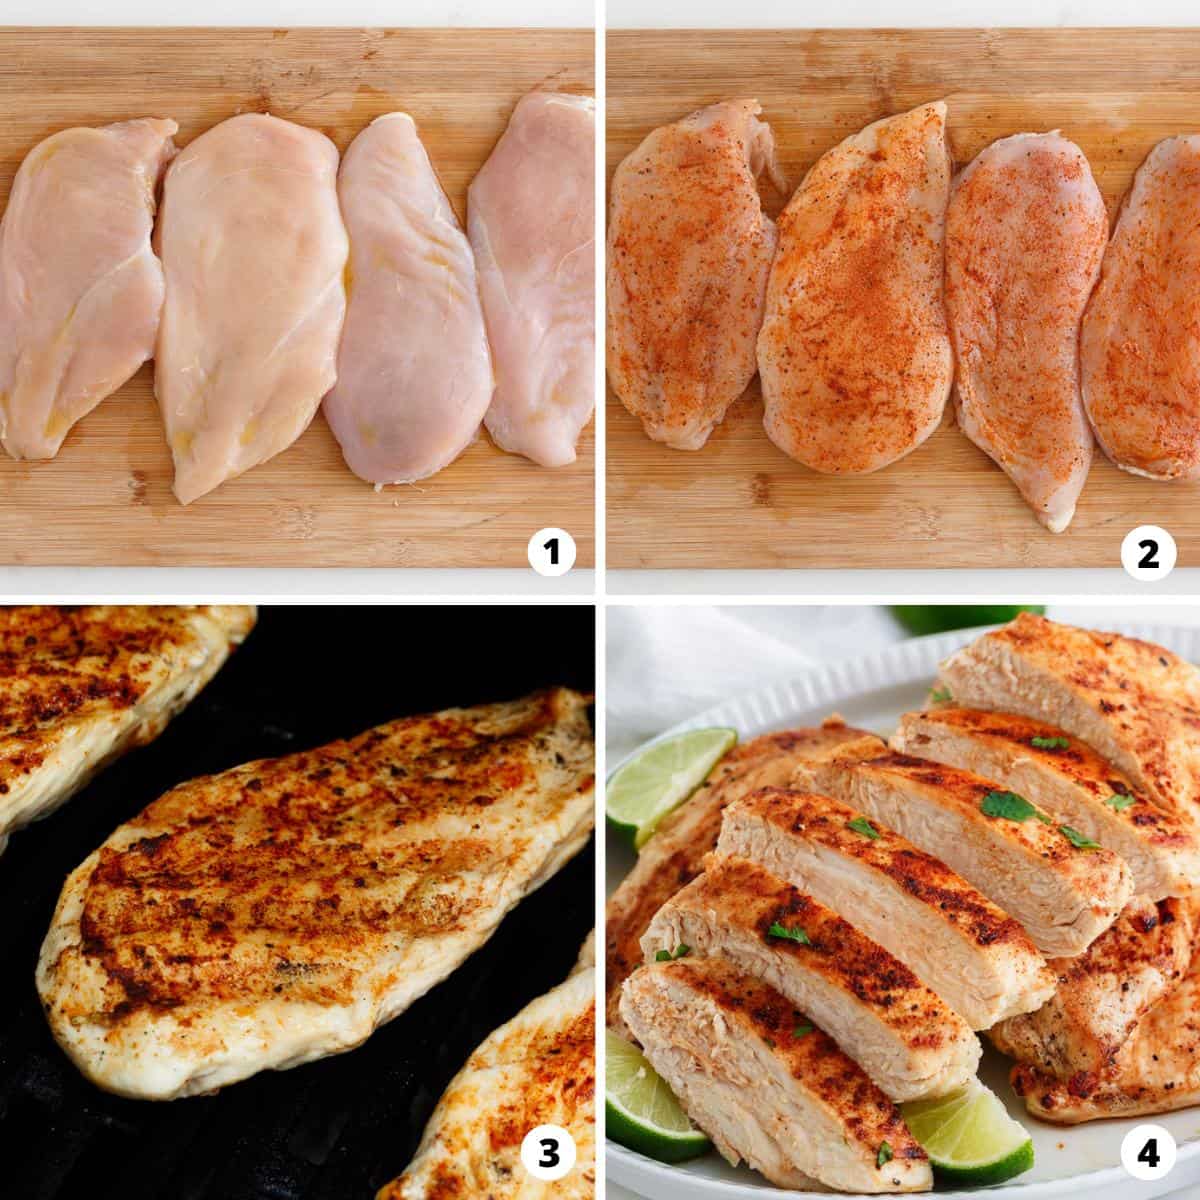 Showing you how to make grilled chicken breast in a 4 step collage.